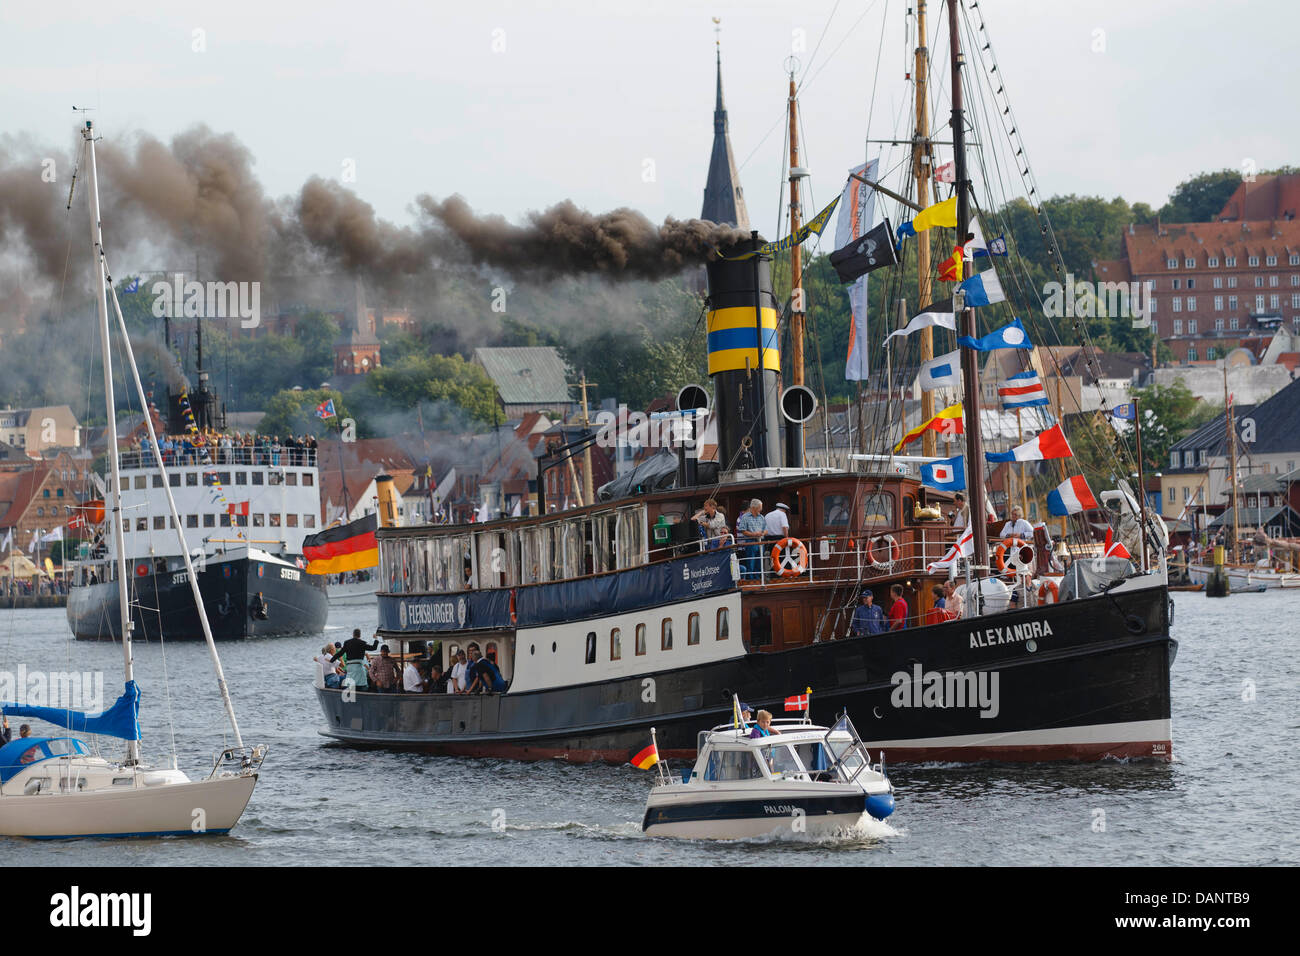 The salon steamship 'Alexandra' built in 1908 puts out to sea during the traditional steamship race on the Flensburg Fjord in Flensburg, Germany, 08 July 2011. Along with many other steamships and other steam driven engines, the event 'Dampf Rundum' is the largest steamer spectacle in Europe, according to the event organizers. Photo: Markus Scholz Stock Photo